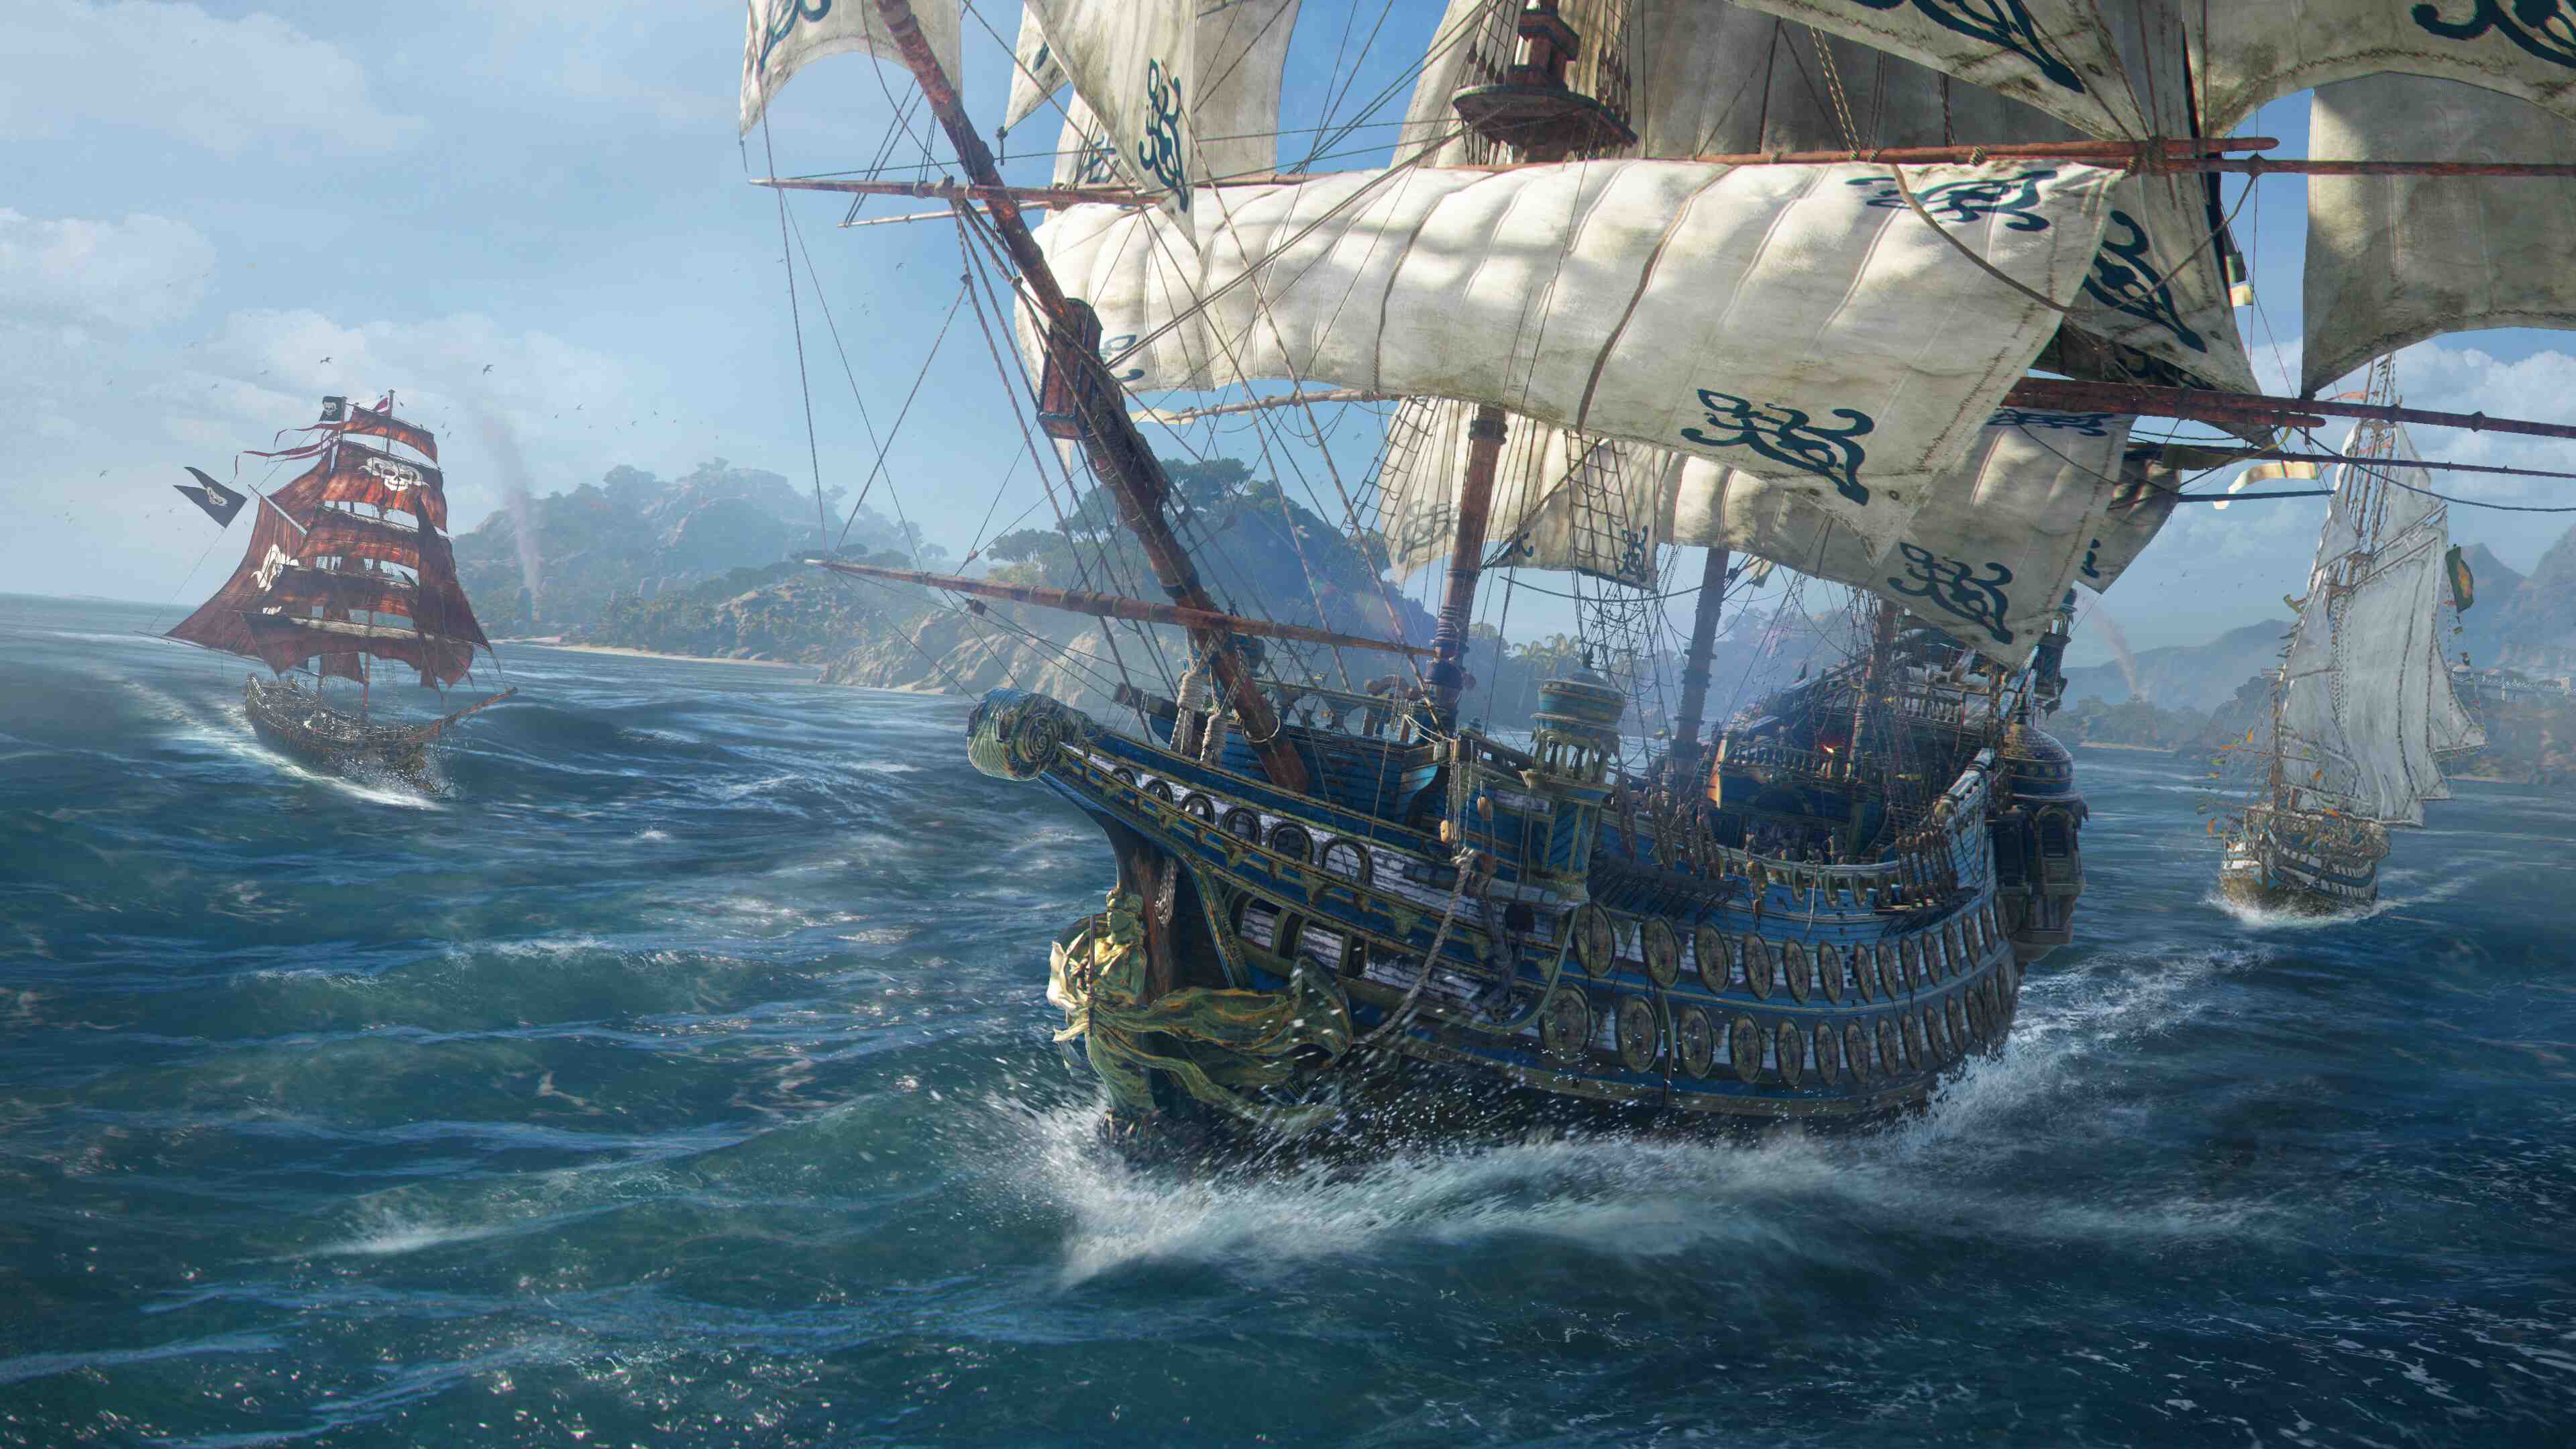 Skull And Bones' endgame content is pretty disappointing after such a long development time | Image Source: IGDB